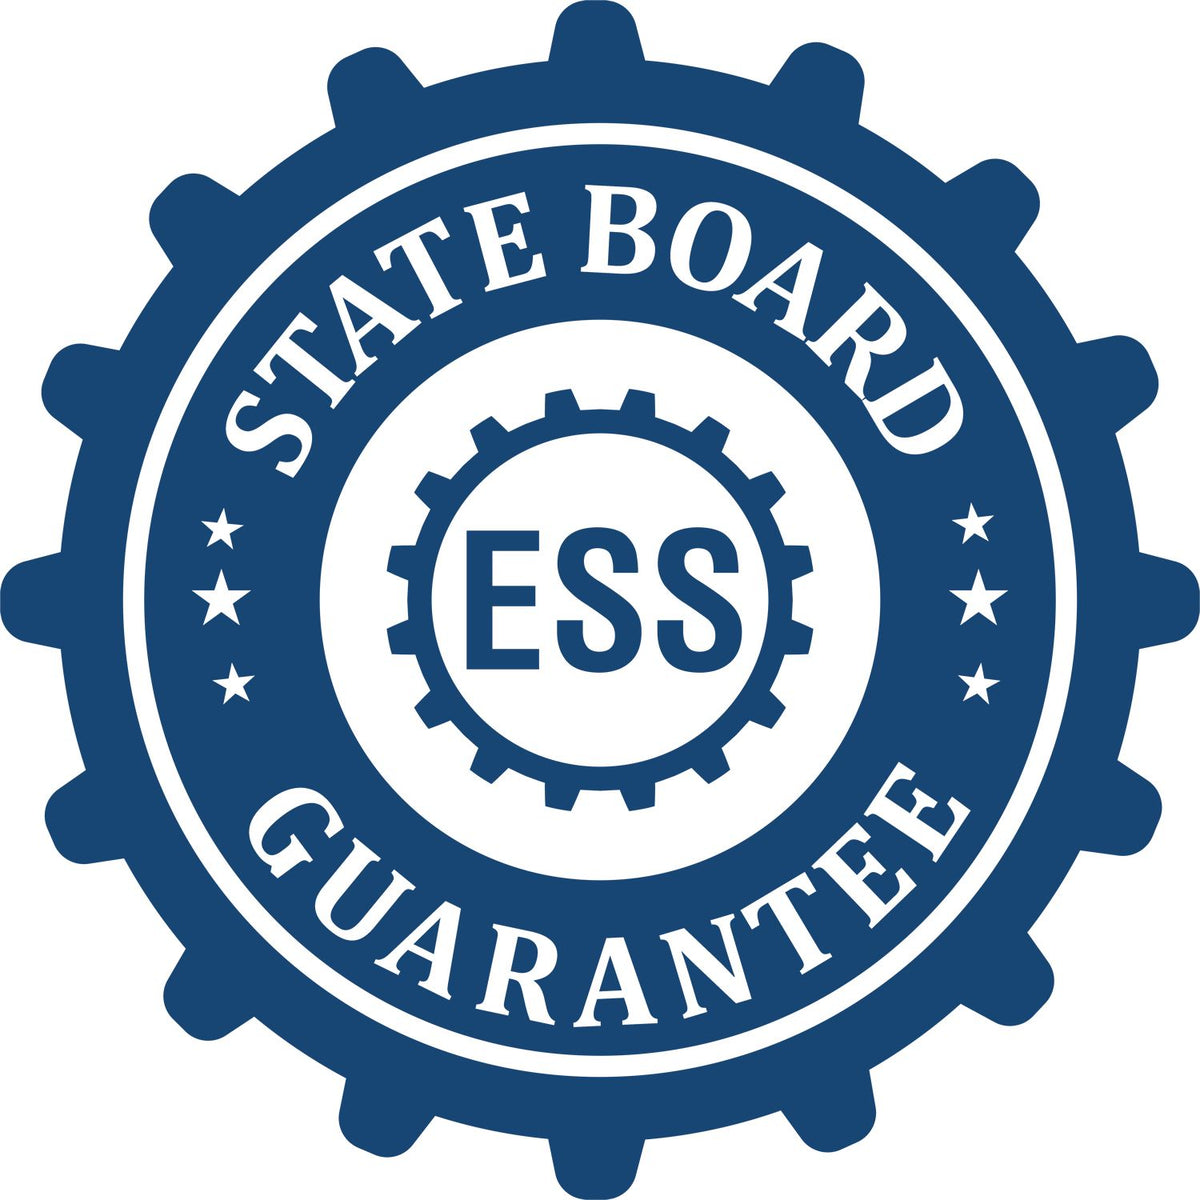 An emblem in a gear shape illustrating a state board guarantee for the New Hampshire Desk Architect Embossing Seal product.